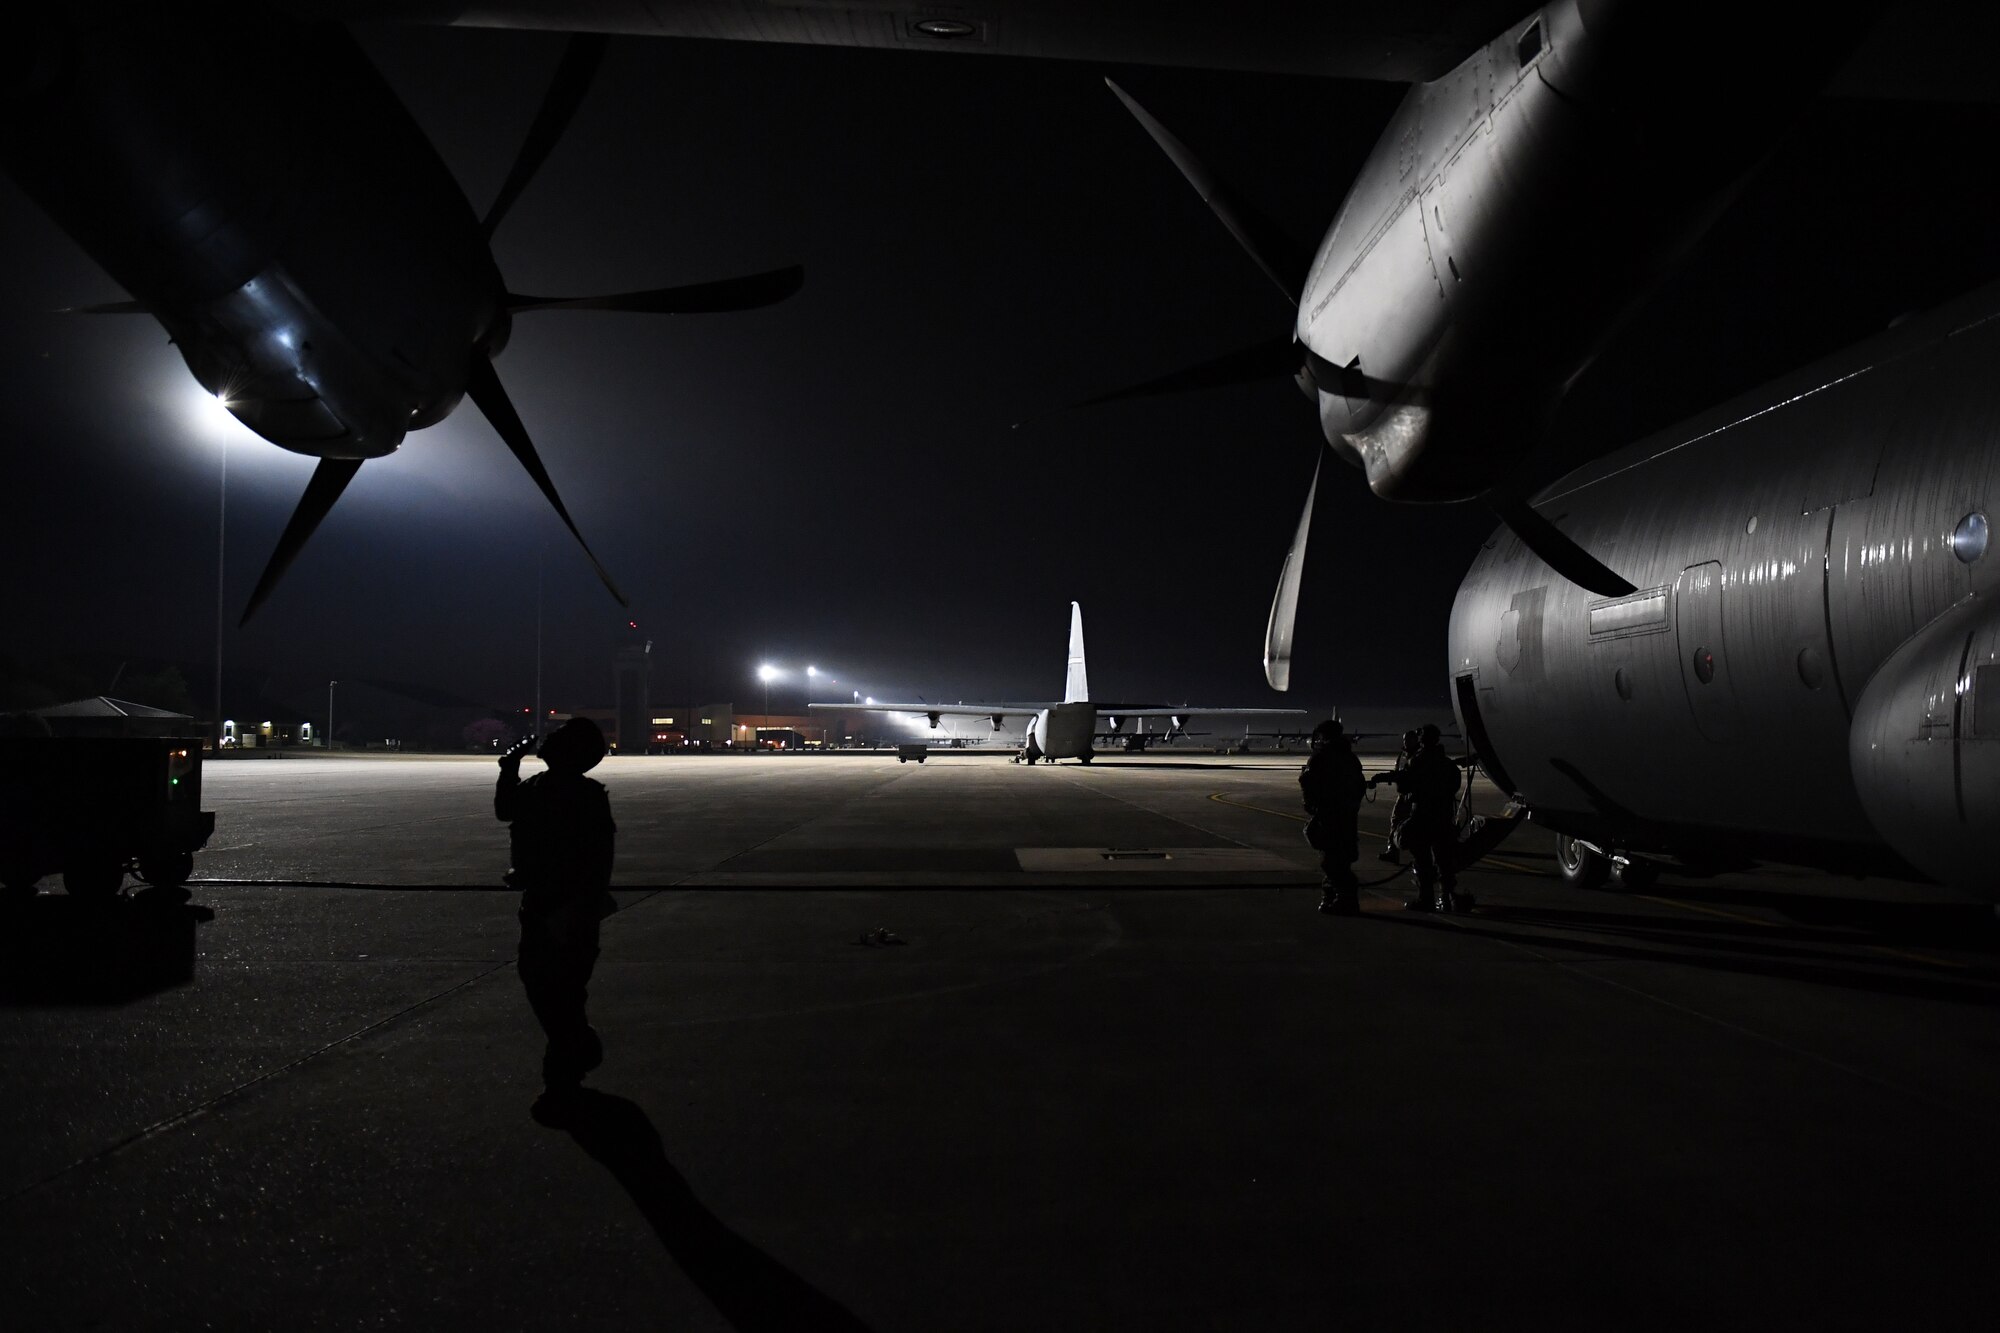 An Airman uses a flashlight at night to inspect a C-130J.